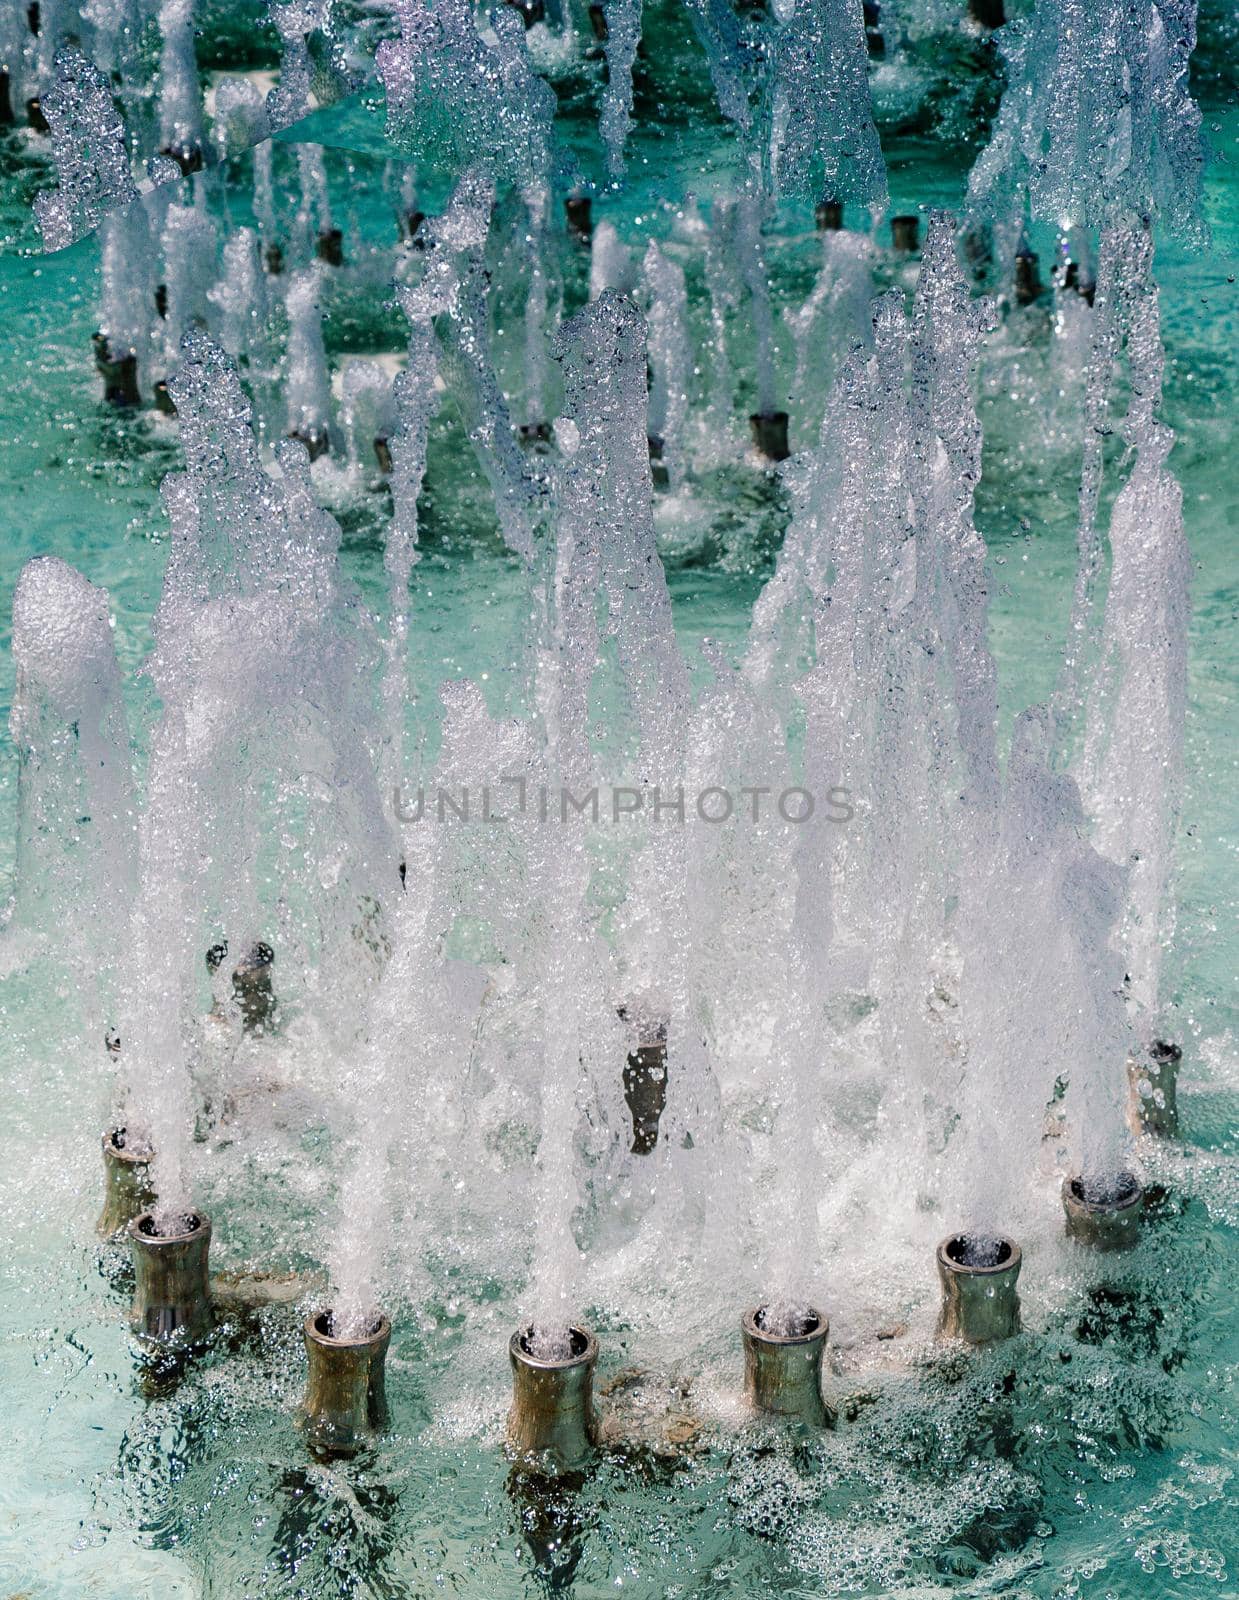 The fountains gushing sparkling water in a pool by berkay